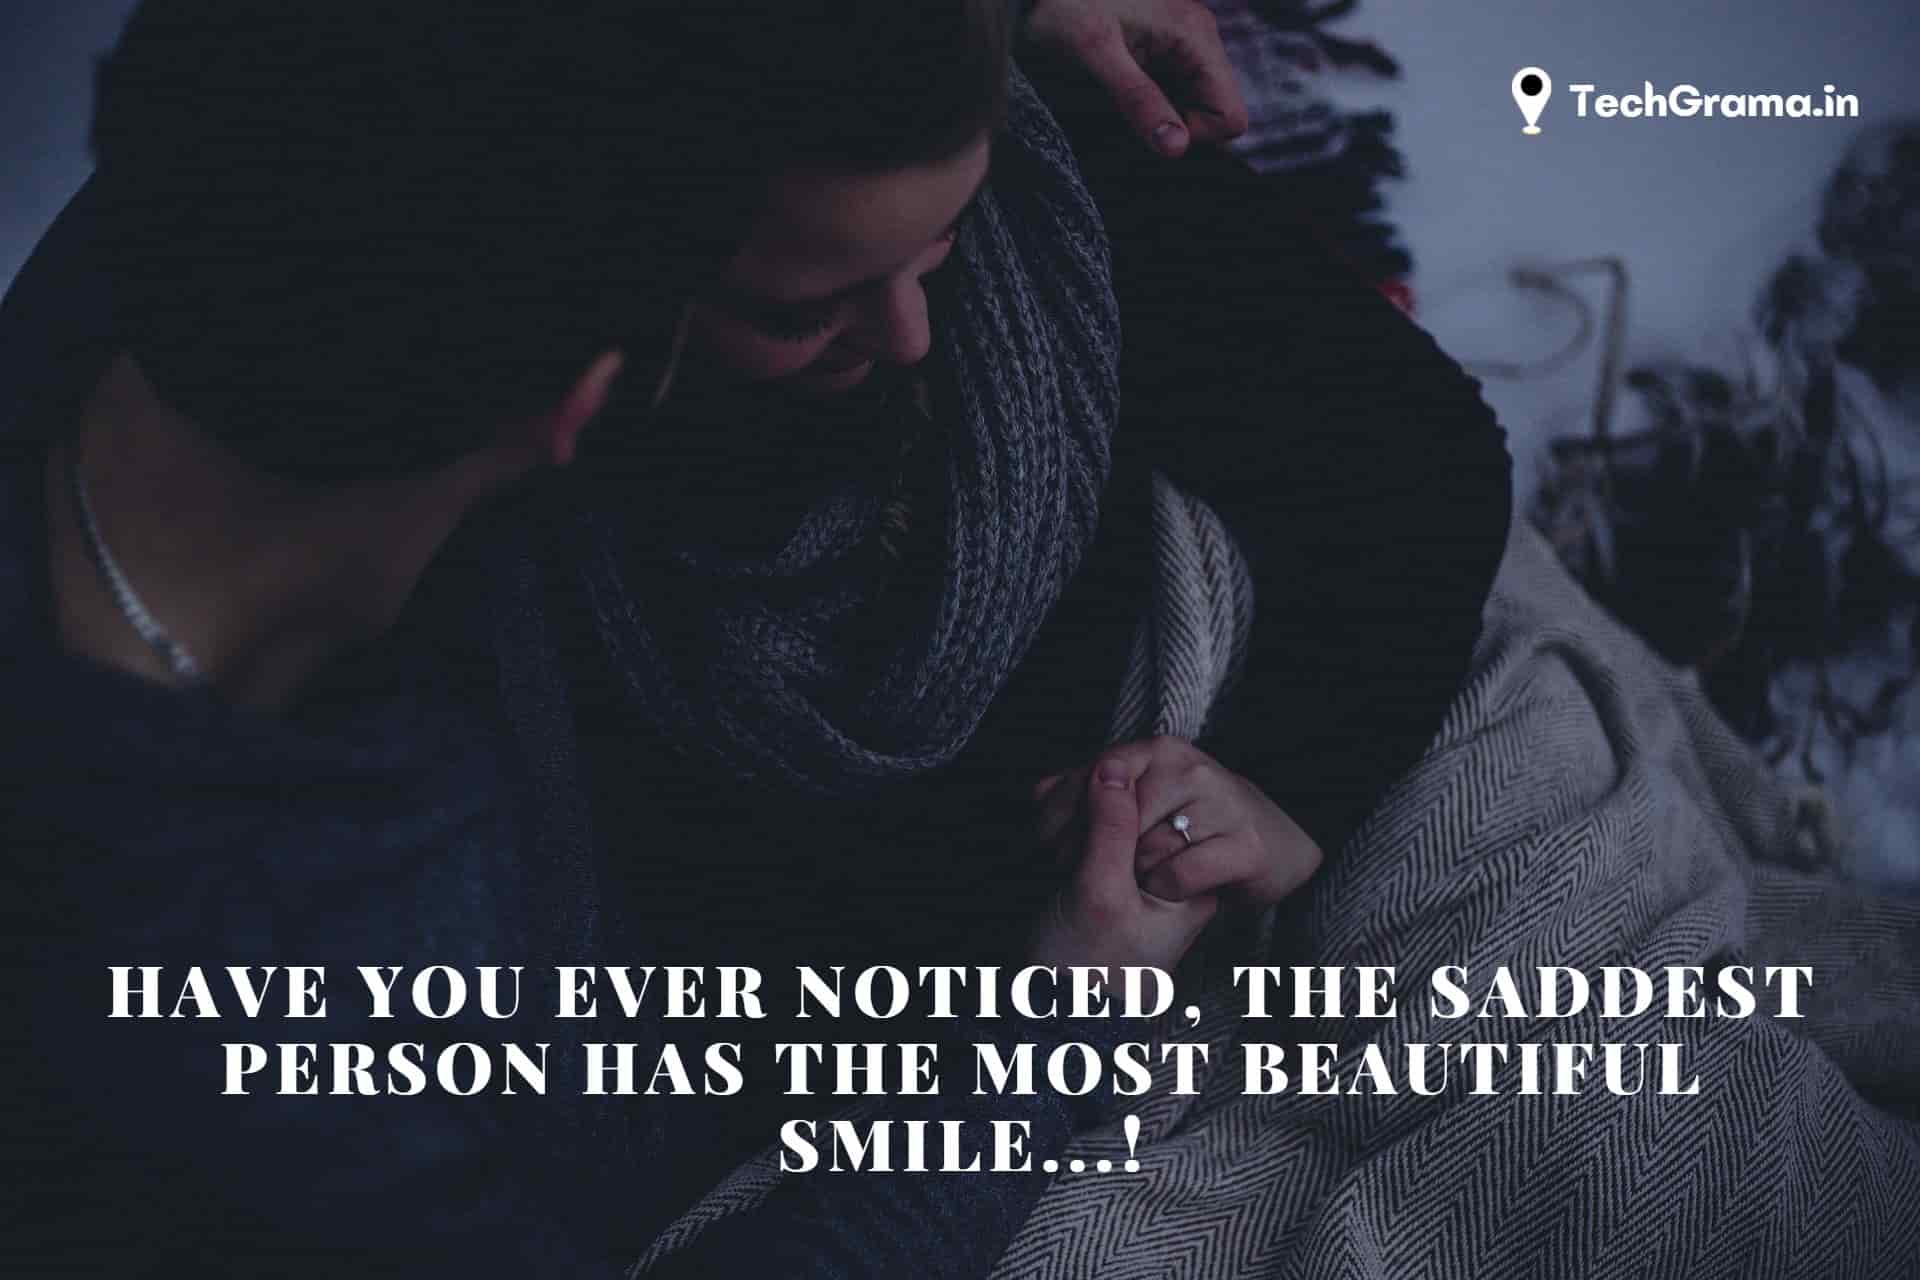 Best Smile Quotes For Love, Romantic Love Smile Quotes, Love Smile Quotes, Love Quotes About Her Smile, Love Life Smile Quotes, Love With Smile Quotes, Love Quotes on Smile, Love Relationship Smile Quotes, Smile Couple Quotes, Quotes About Smile And Love, Love Your Smile Quotes, Love Smile Quotes For Him & Her.